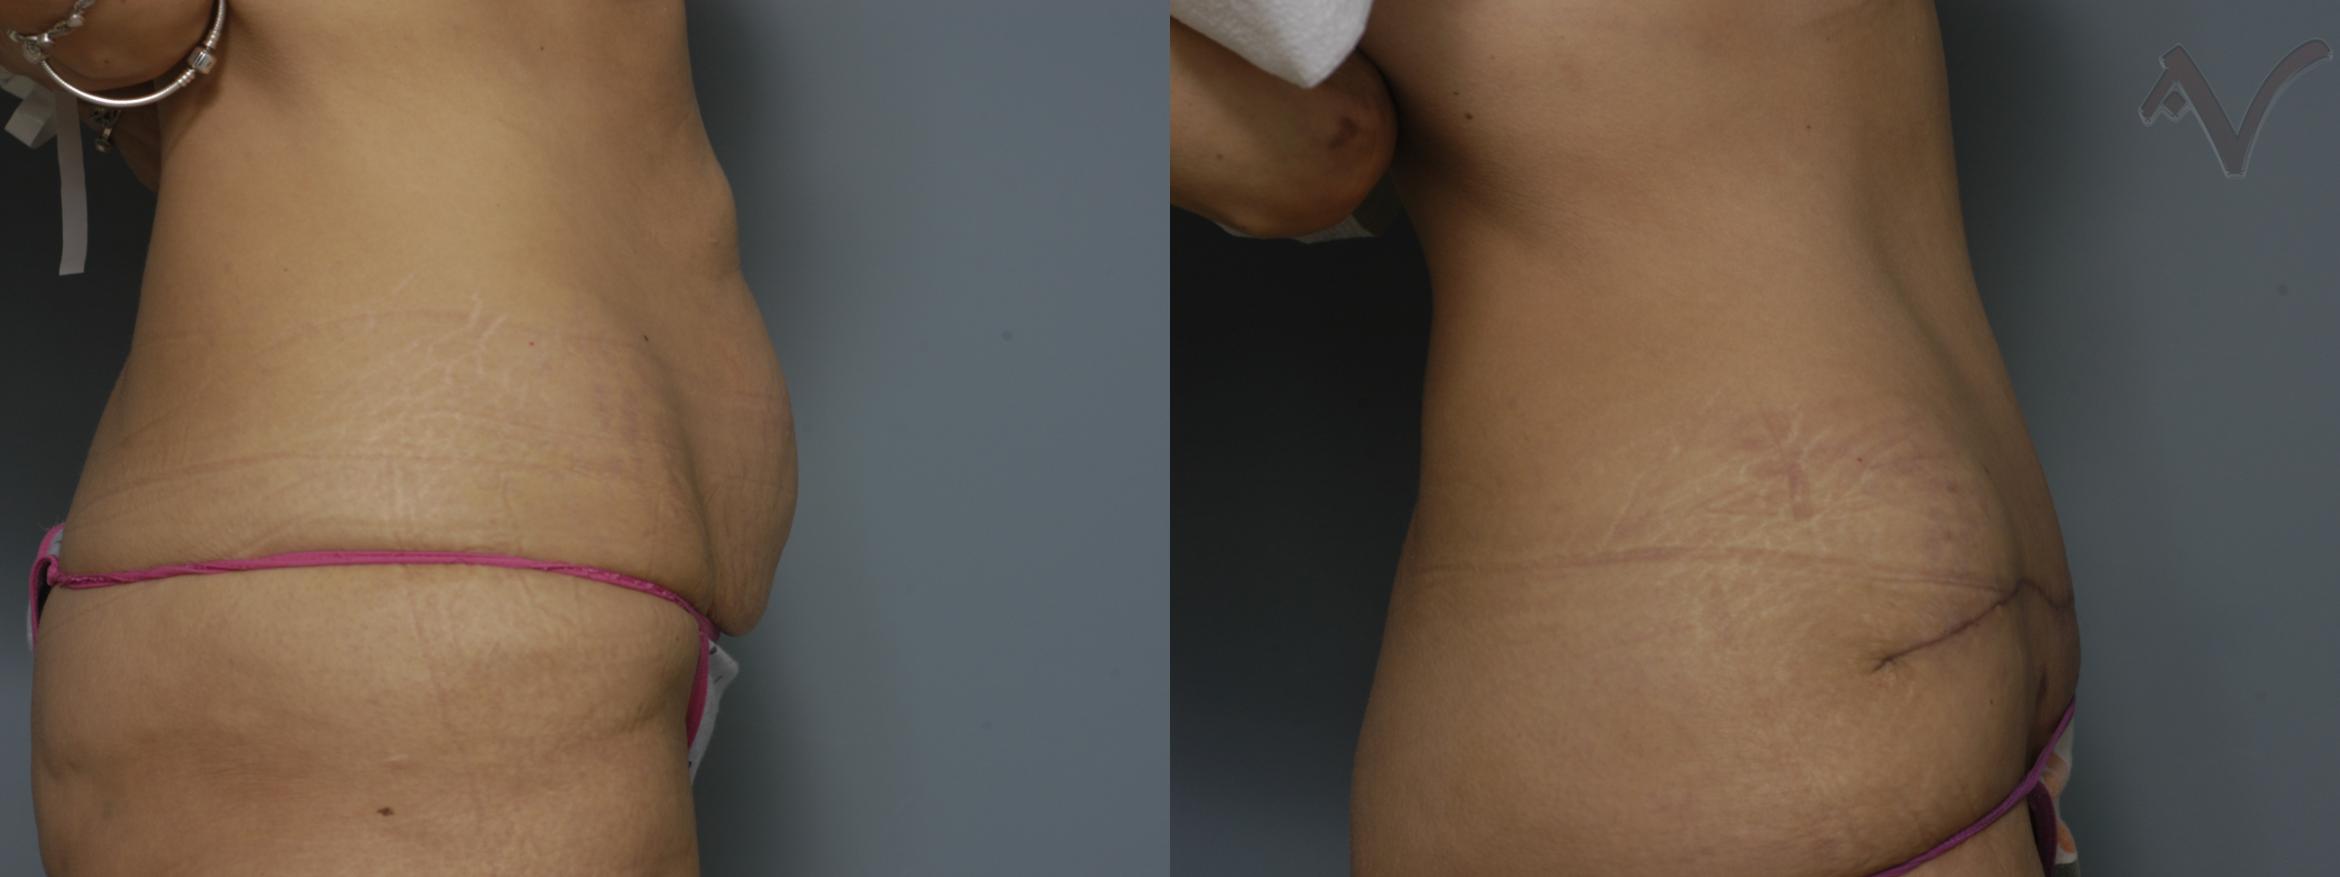 Before & After Tummy Tuck Case 245 Right Side View in Burbank, CA